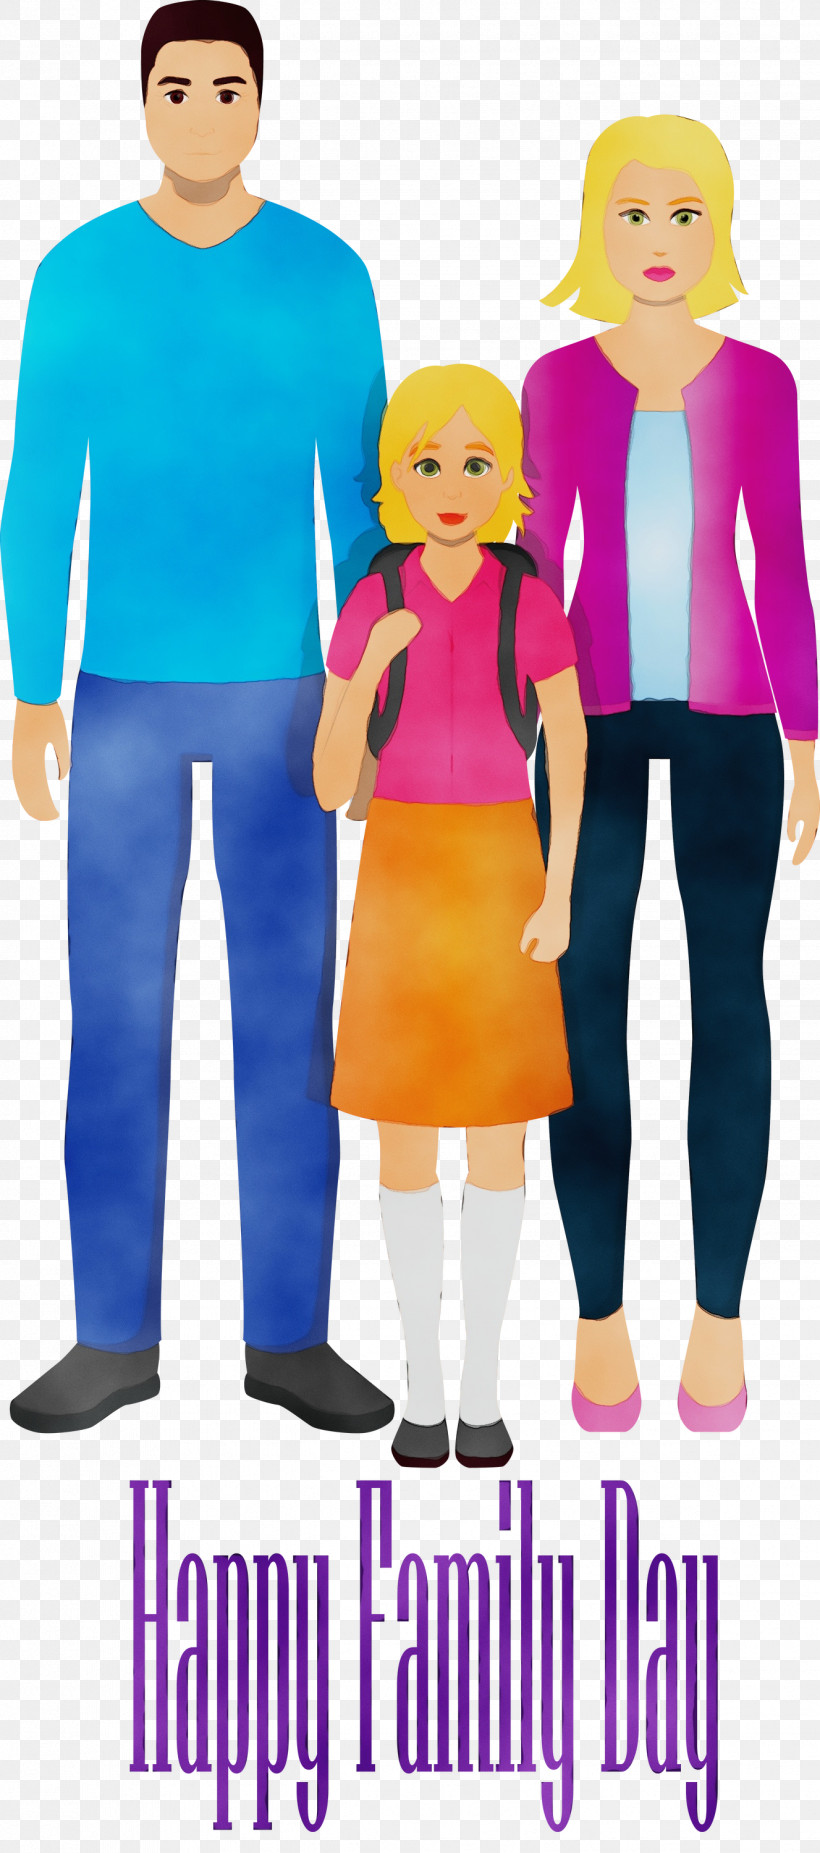 Cartoon Electric Blue Style Sleeve, PNG, 1327x3000px, Family Day, Cartoon, Electric Blue, Paint, Sleeve Download Free